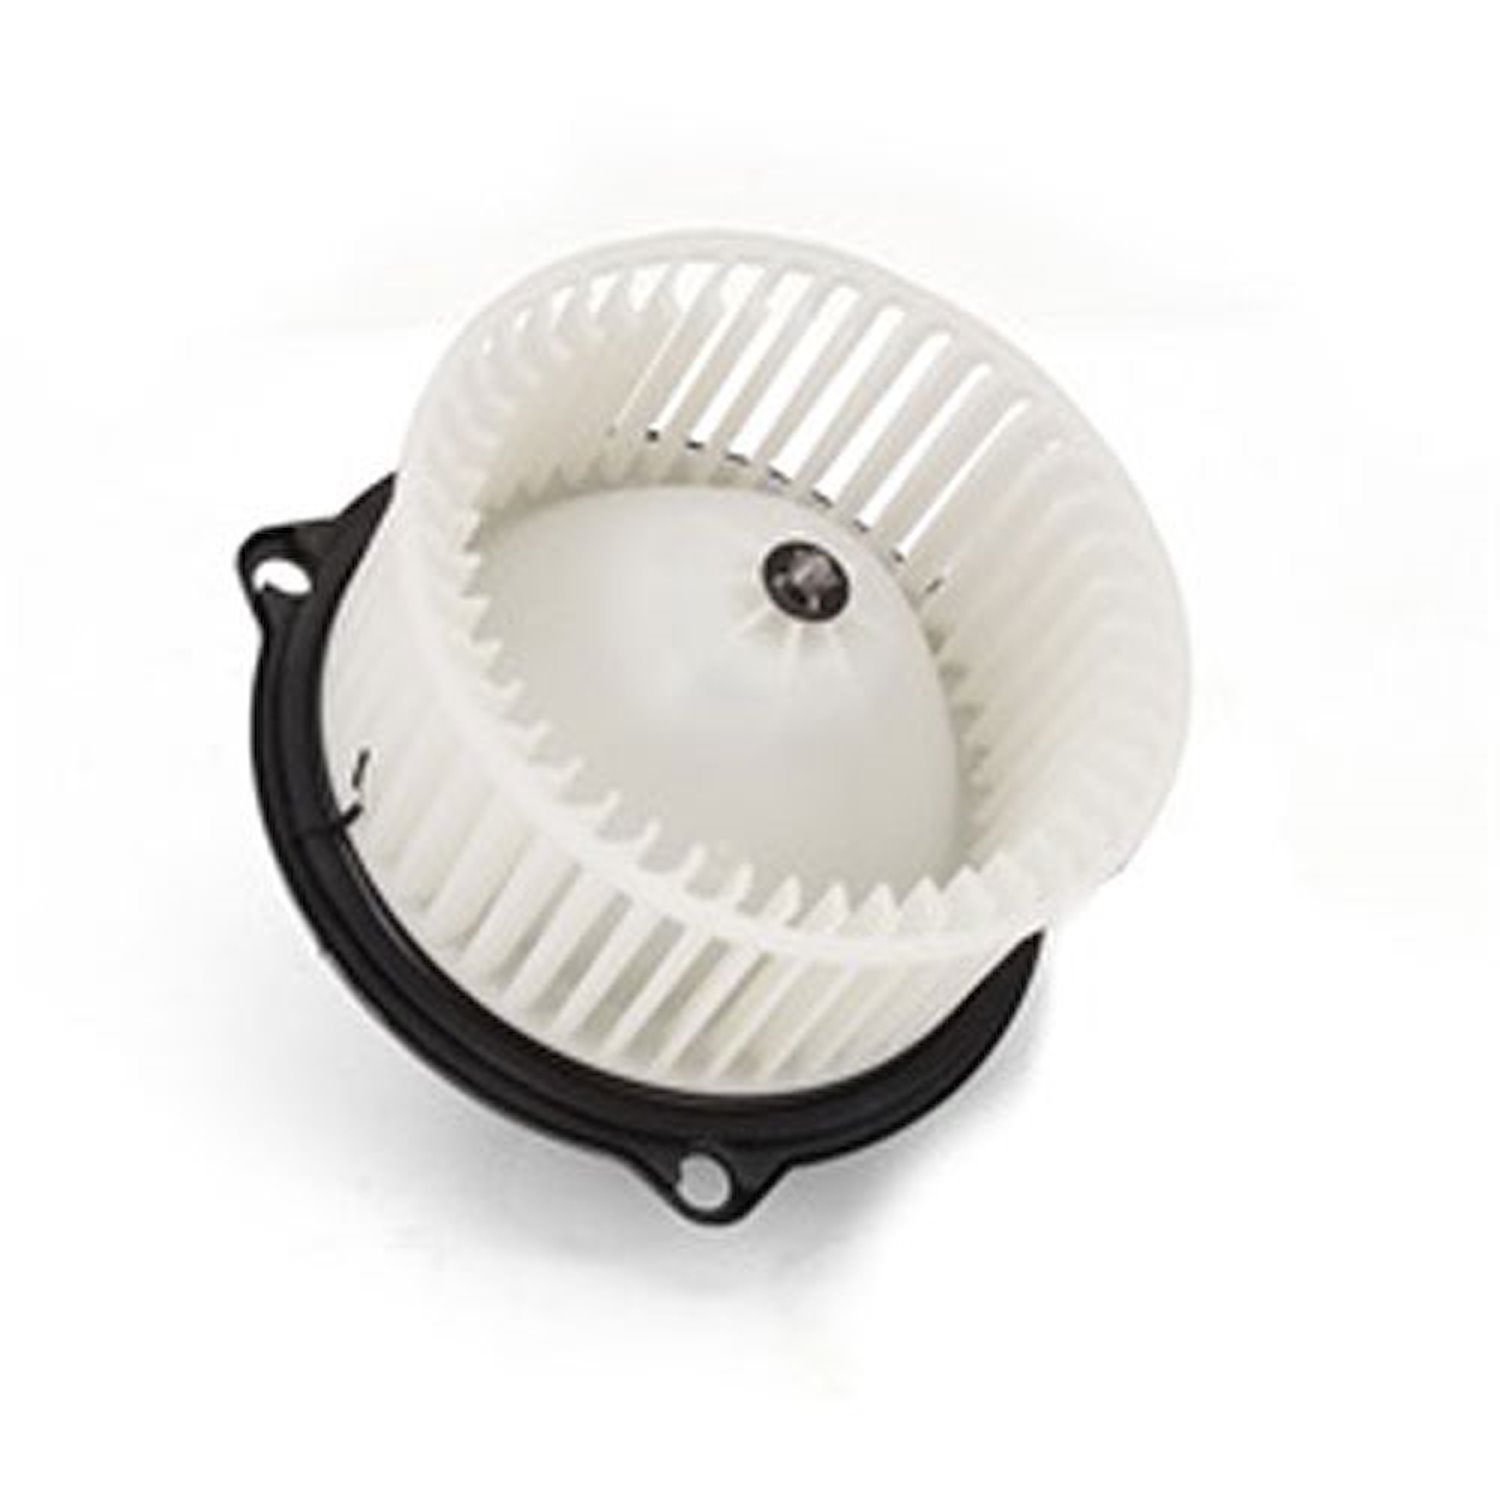 This blower assembly from Omix-ADA fits 97-01 Jeep Cherokees and 99-01 Wranglers.